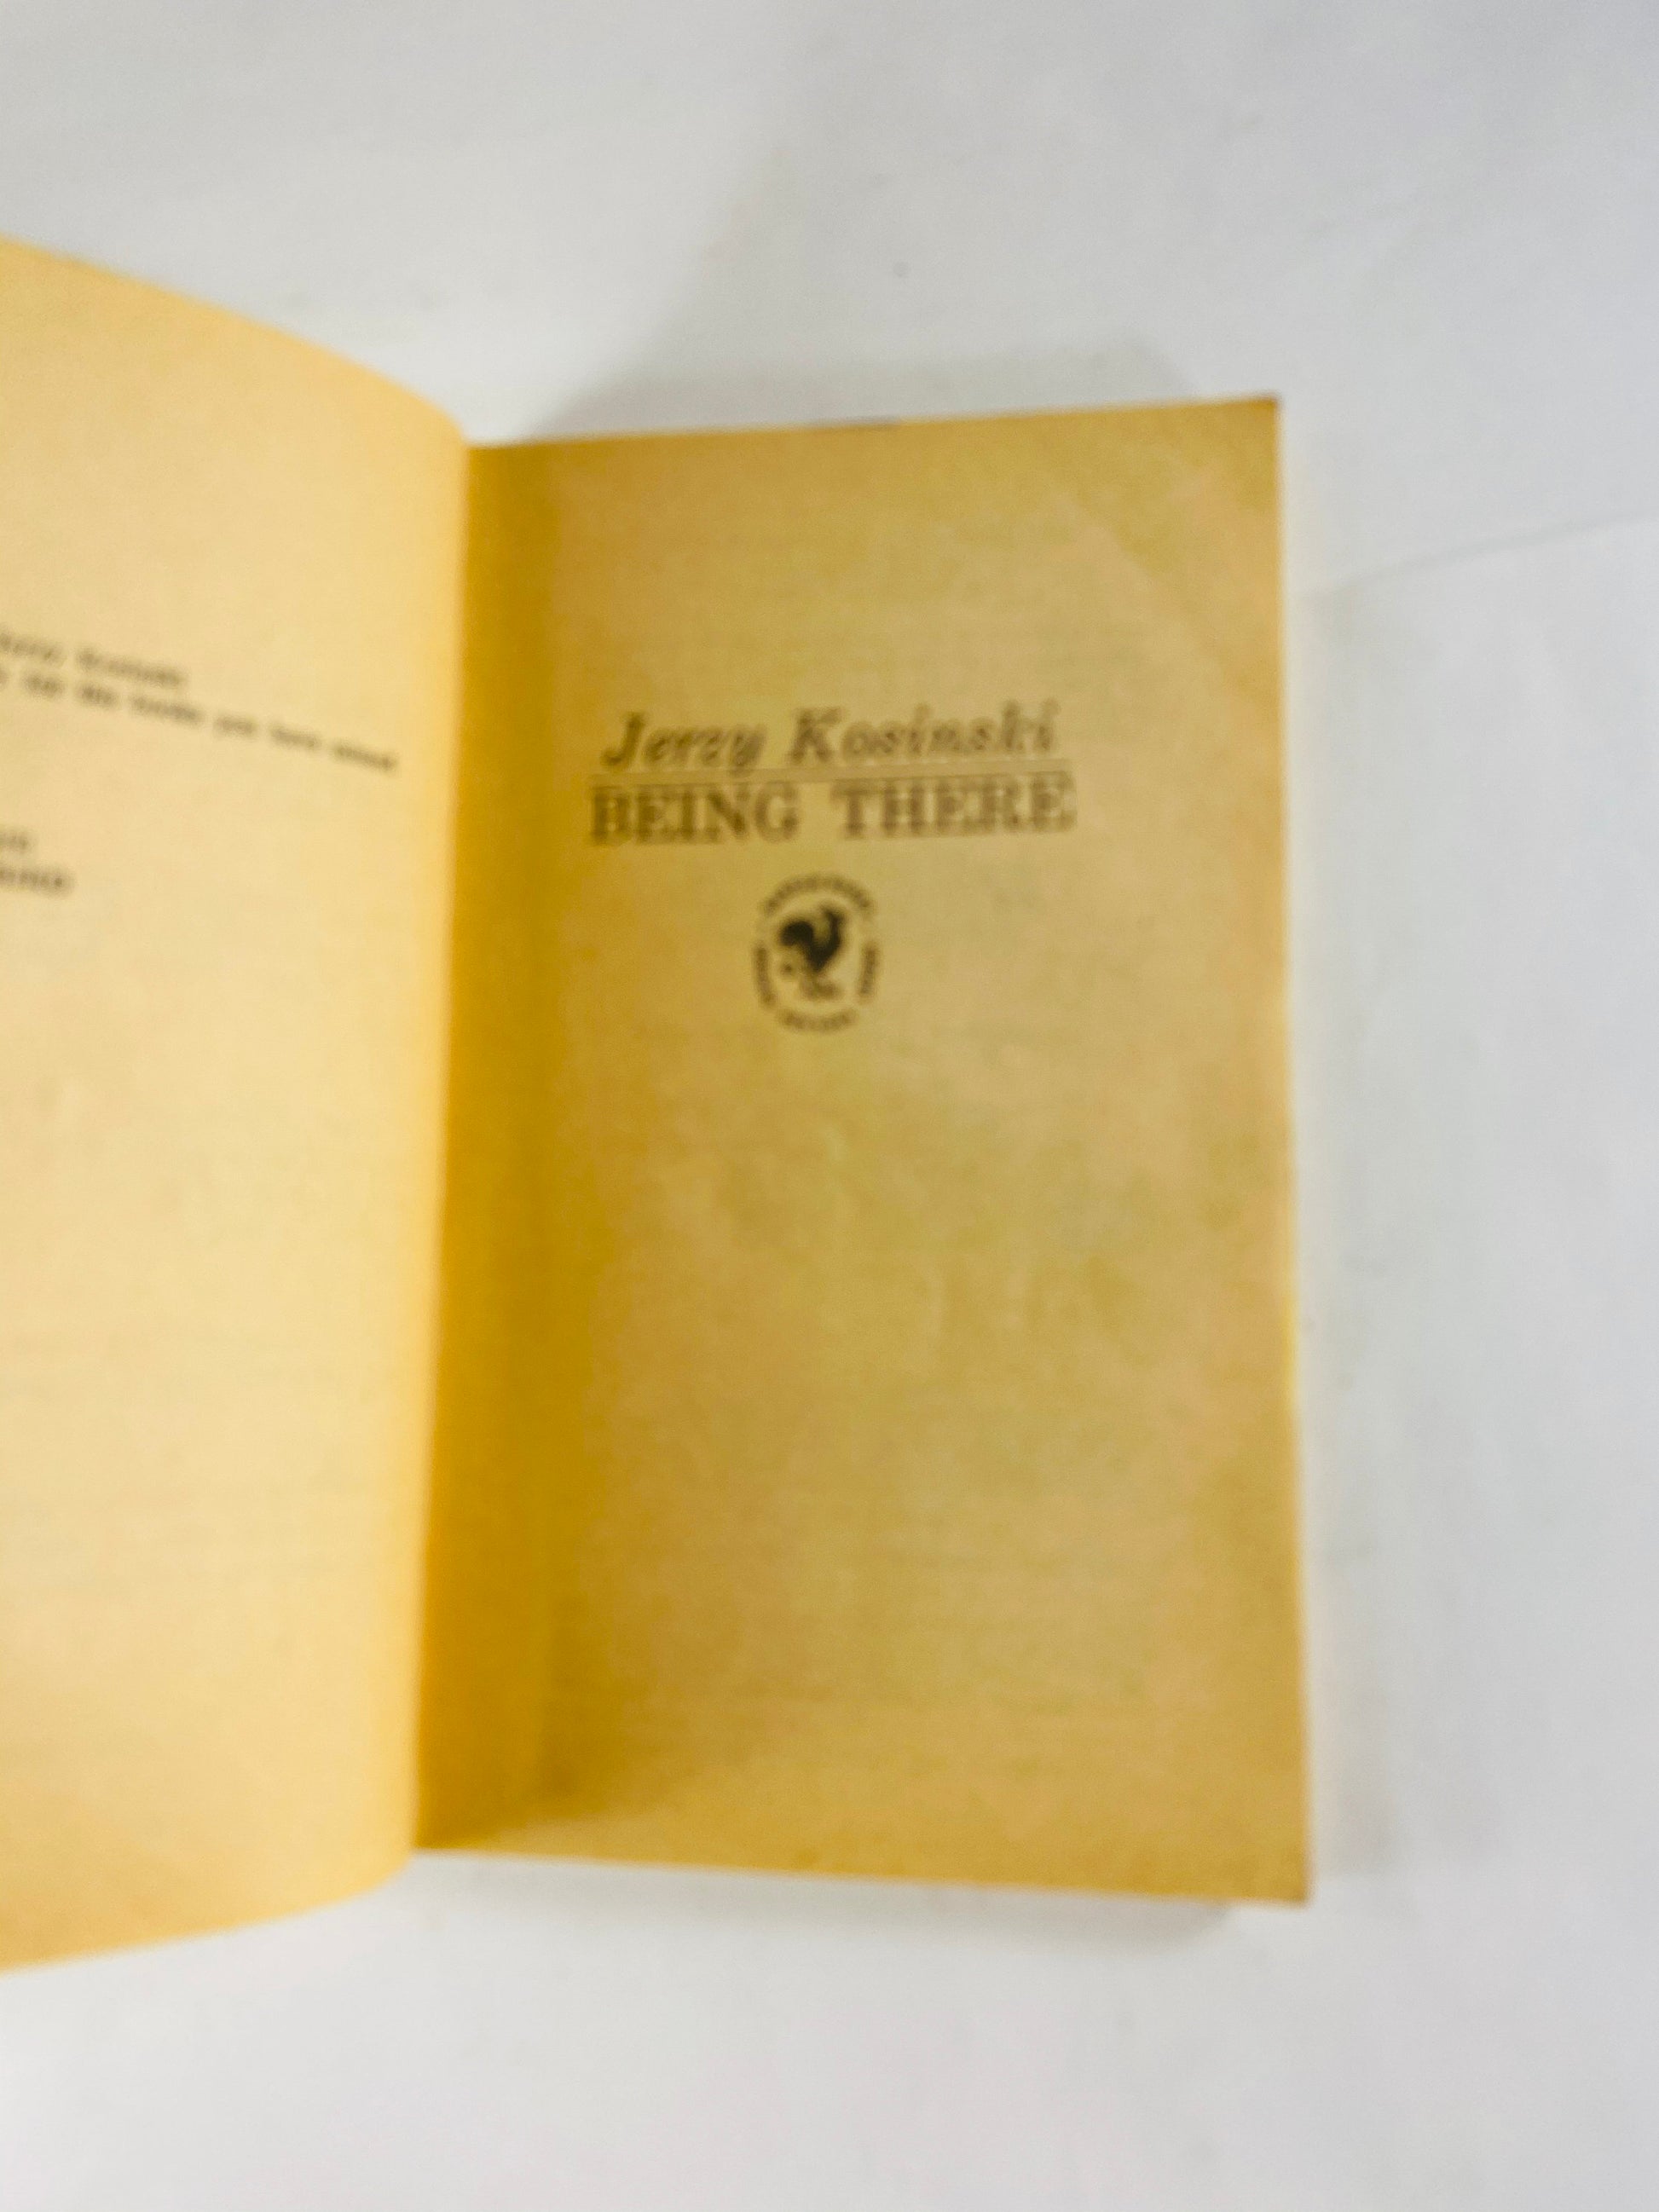 1978 Being There by Jerzy Kosinski Vintage paperback book Sexual novel about terror killing, fear and politics